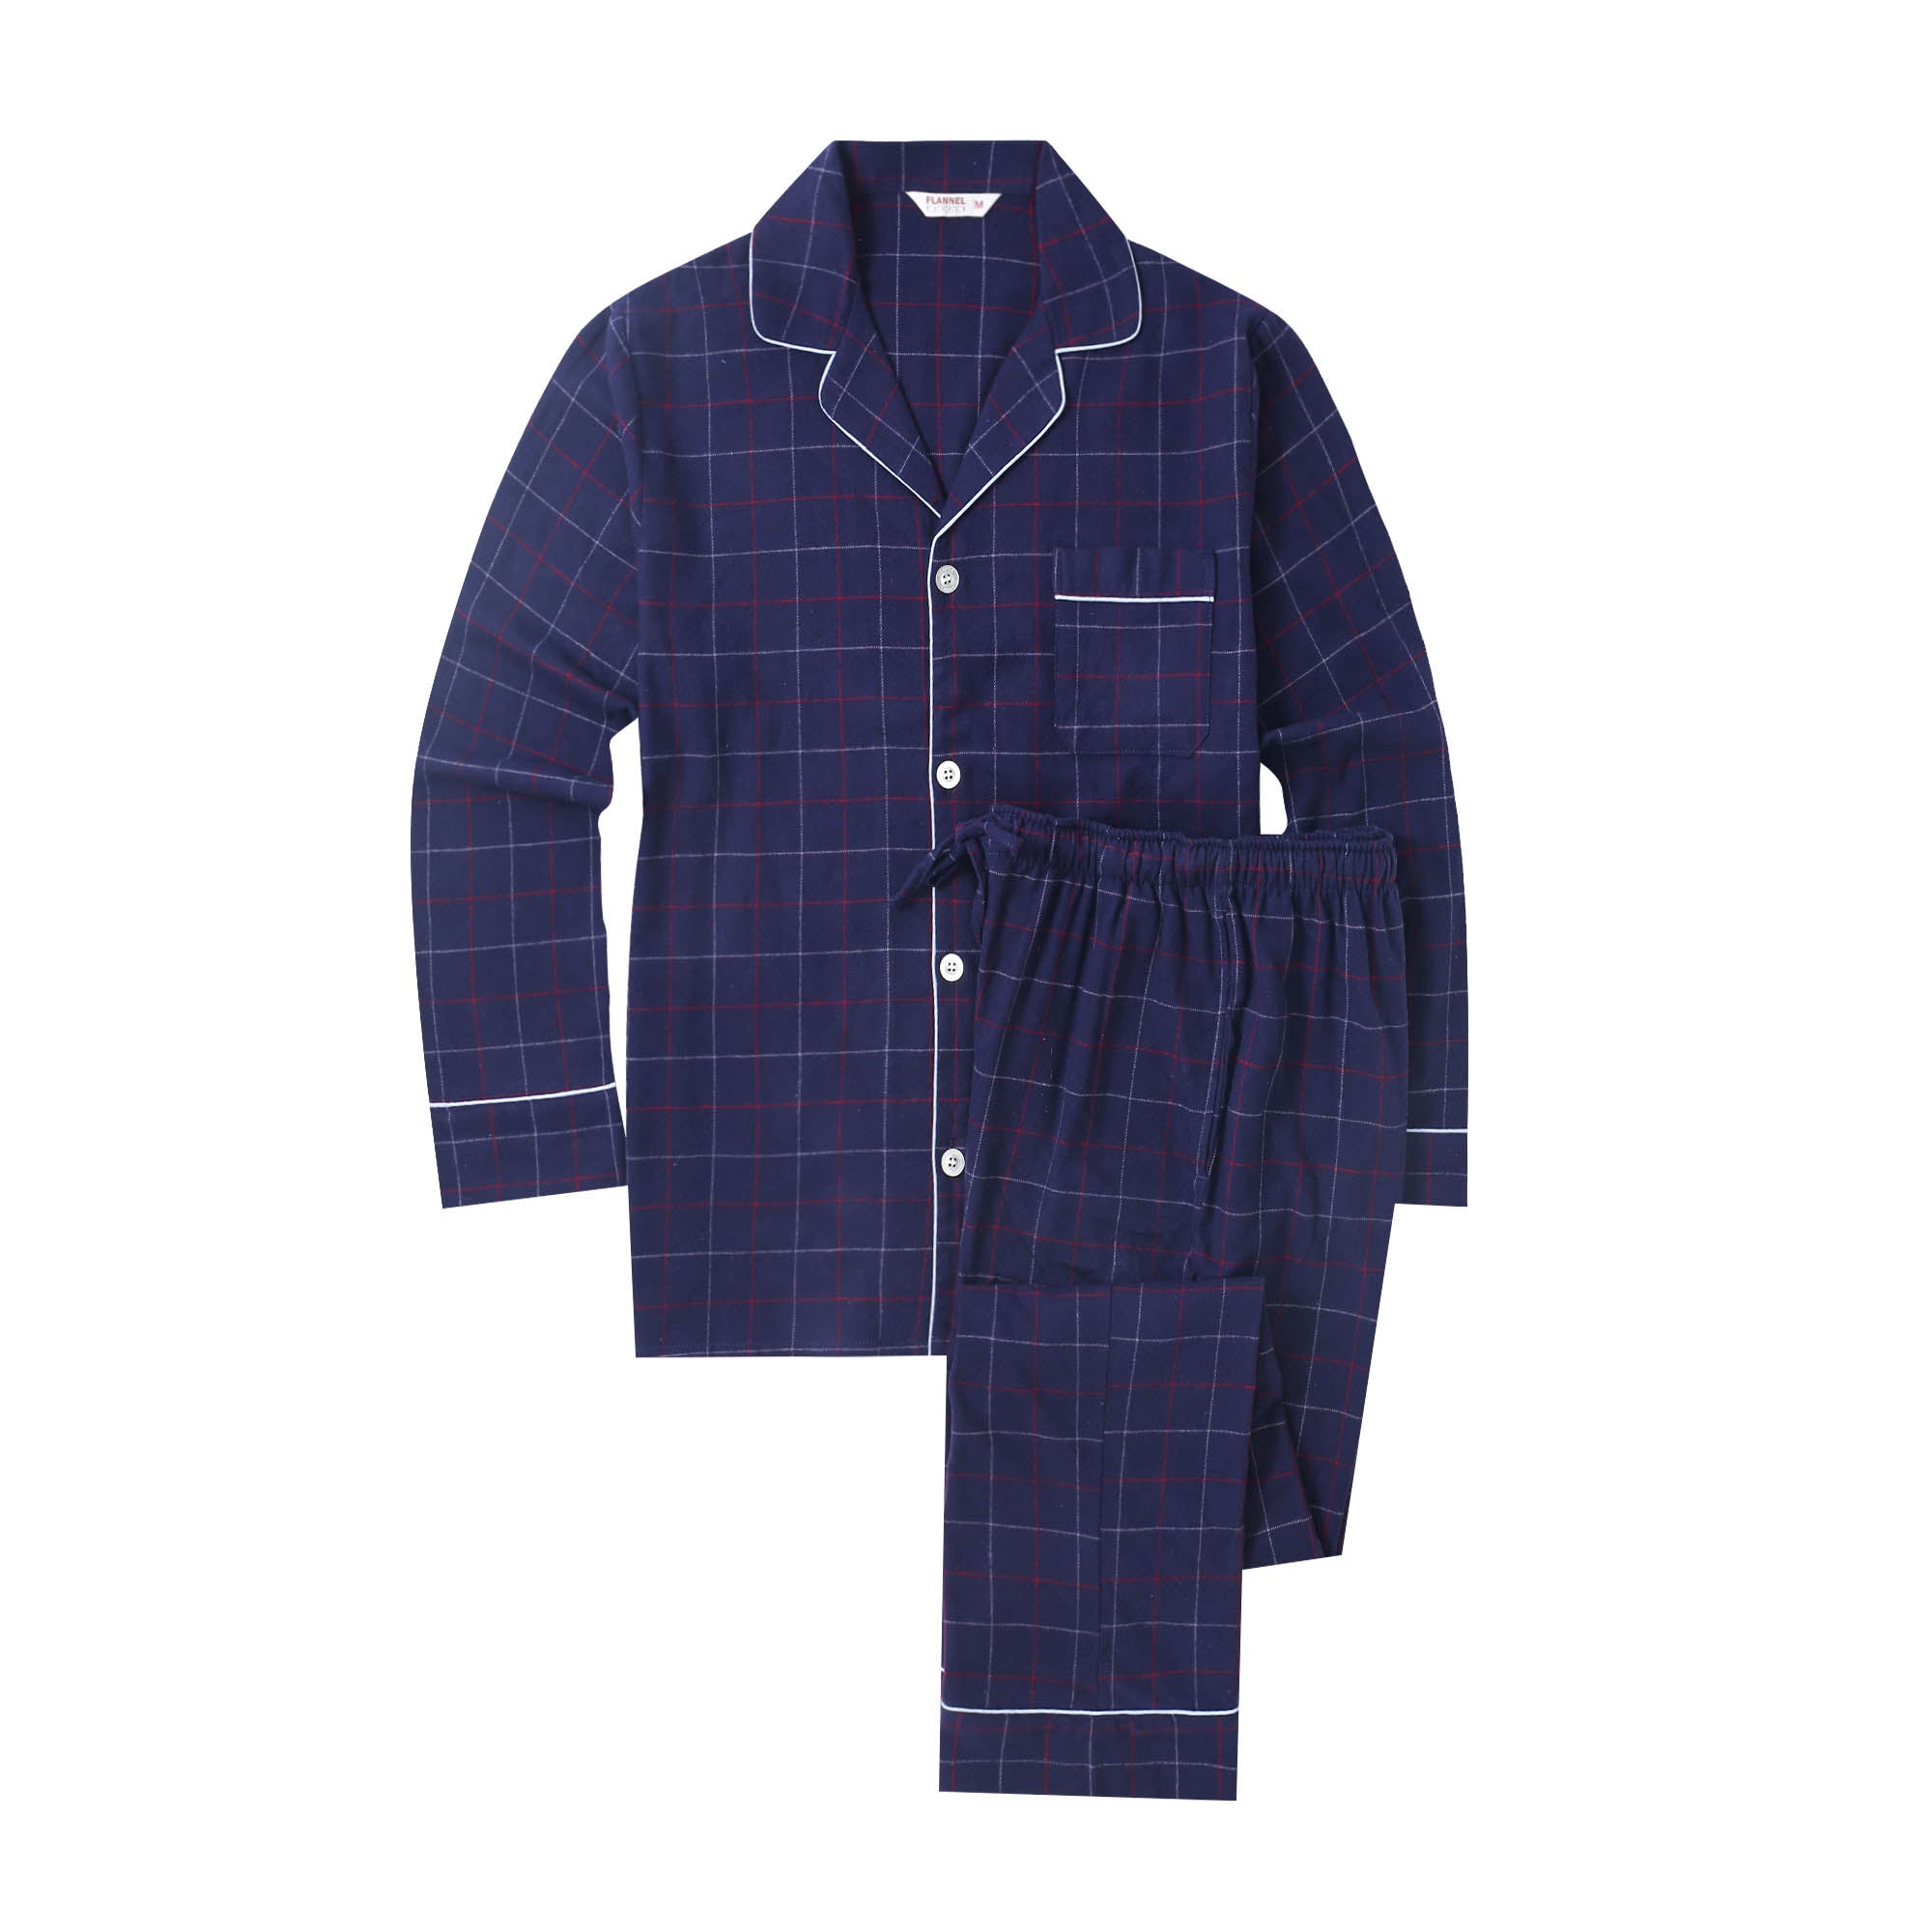 Flannel People Mens 100% Cotton Flannel Pajama Set with Pant Pockets & Drawstring - Checks Navy-Red